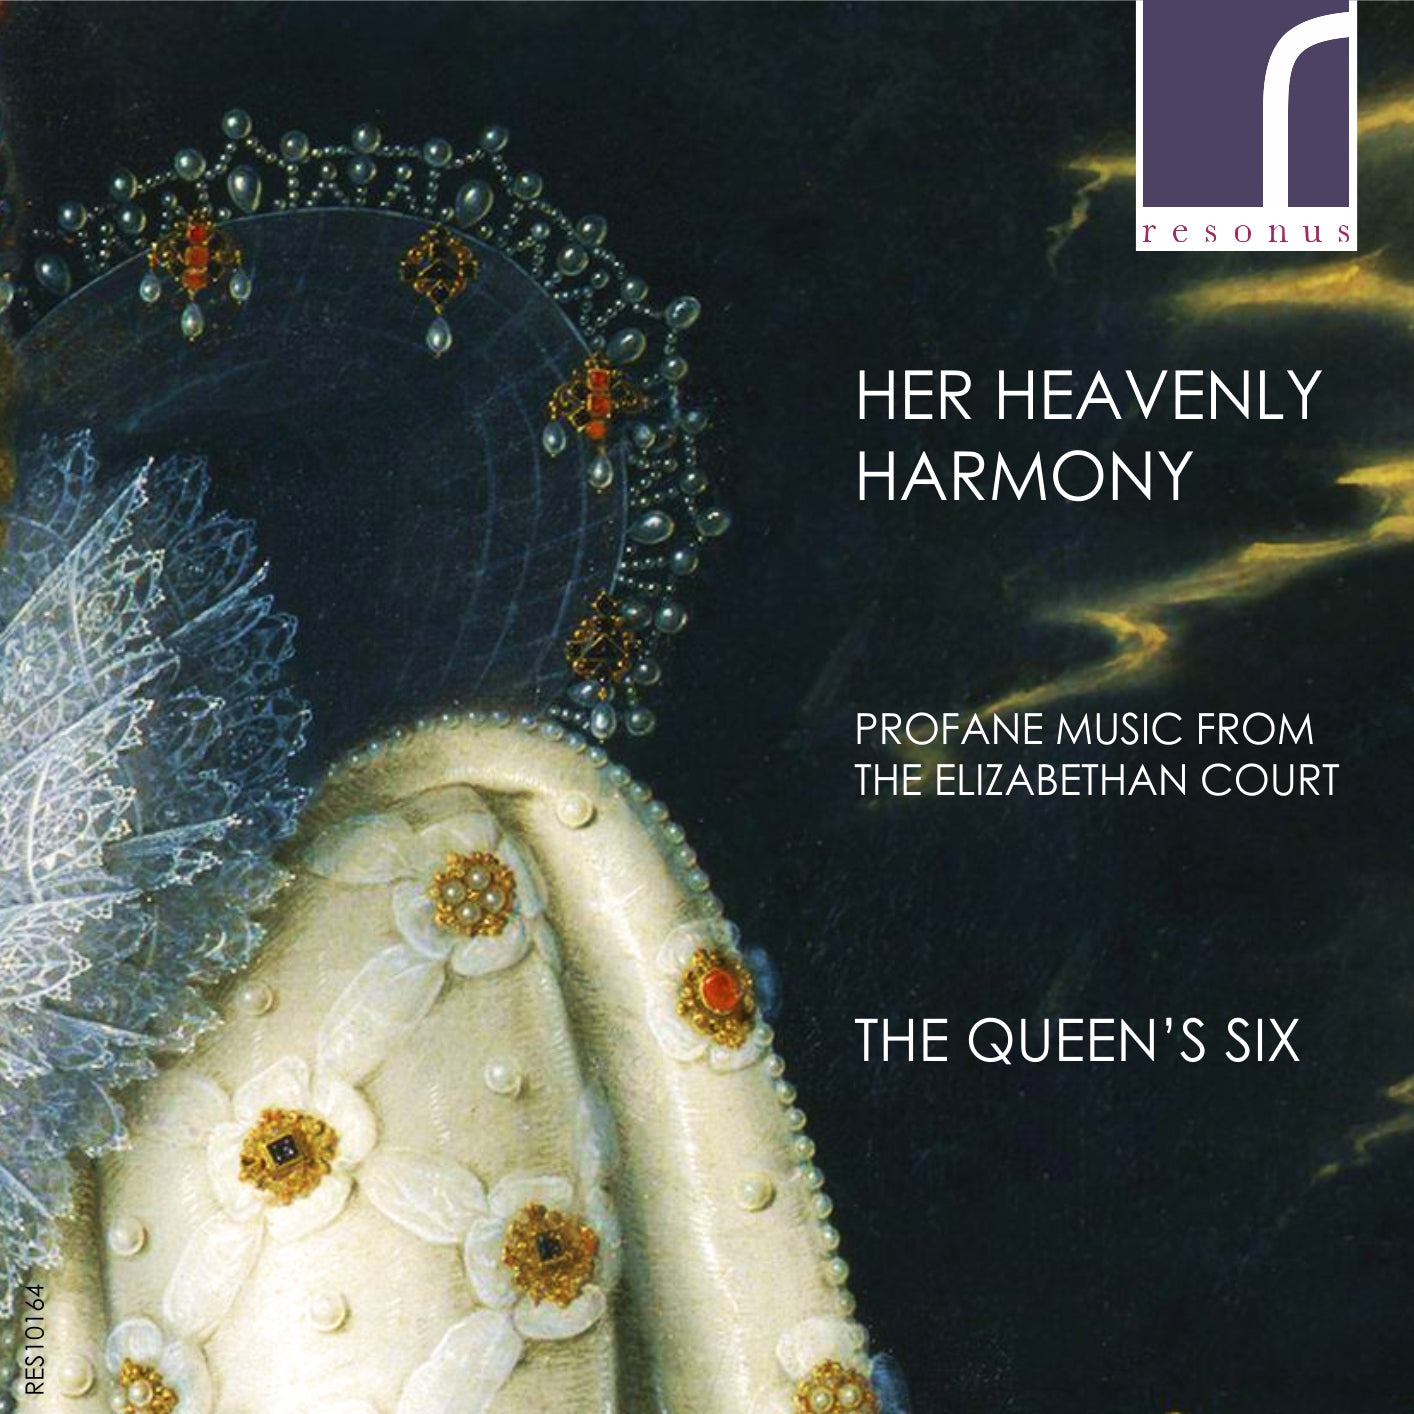 Her Heavenly Harmony: Profane Music from the Royal Court